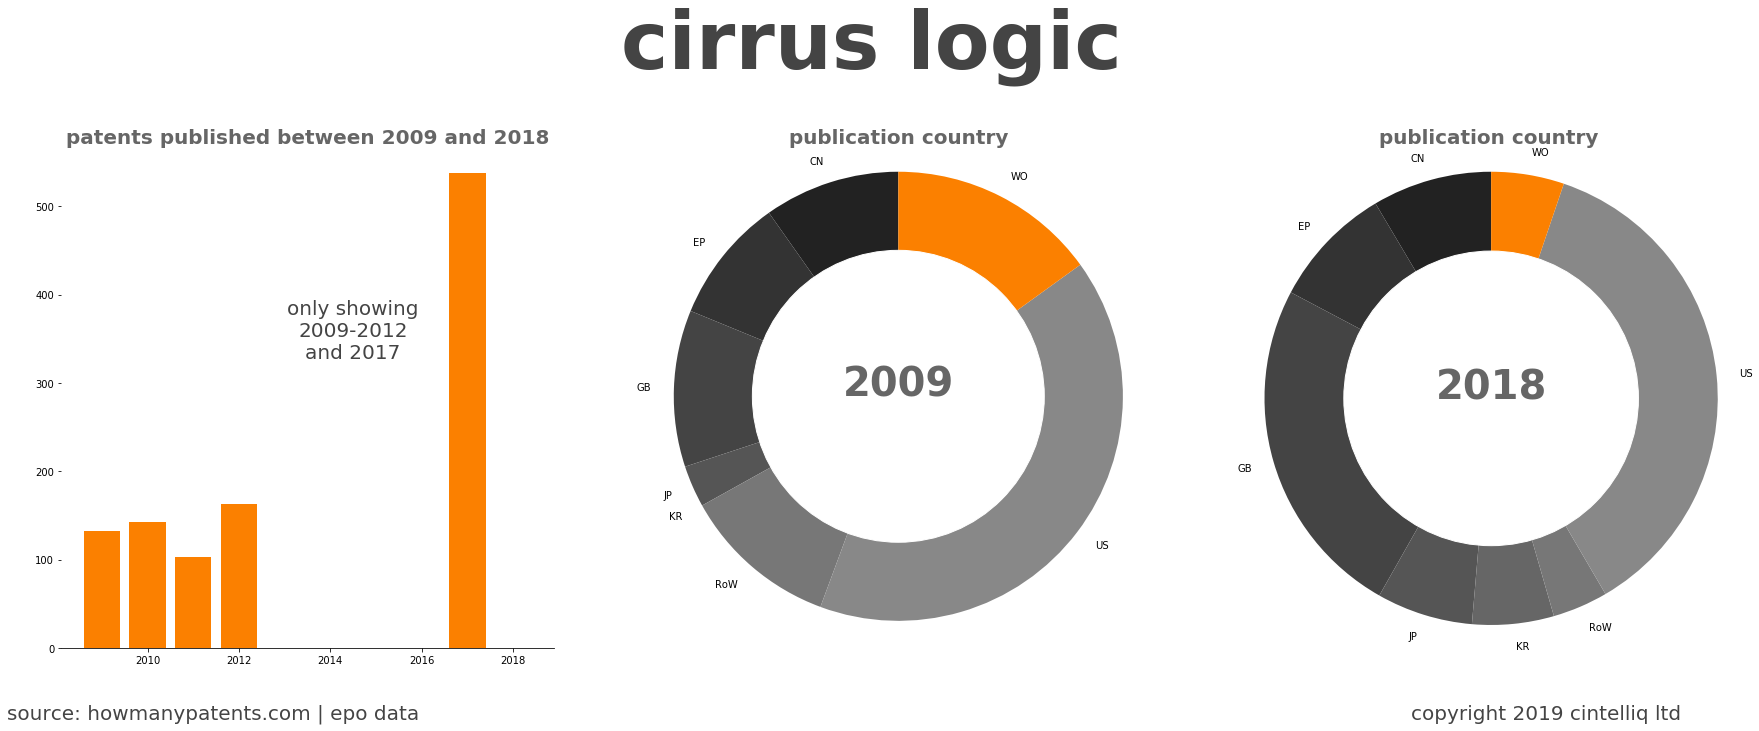 summary of patents for Cirrus Logic